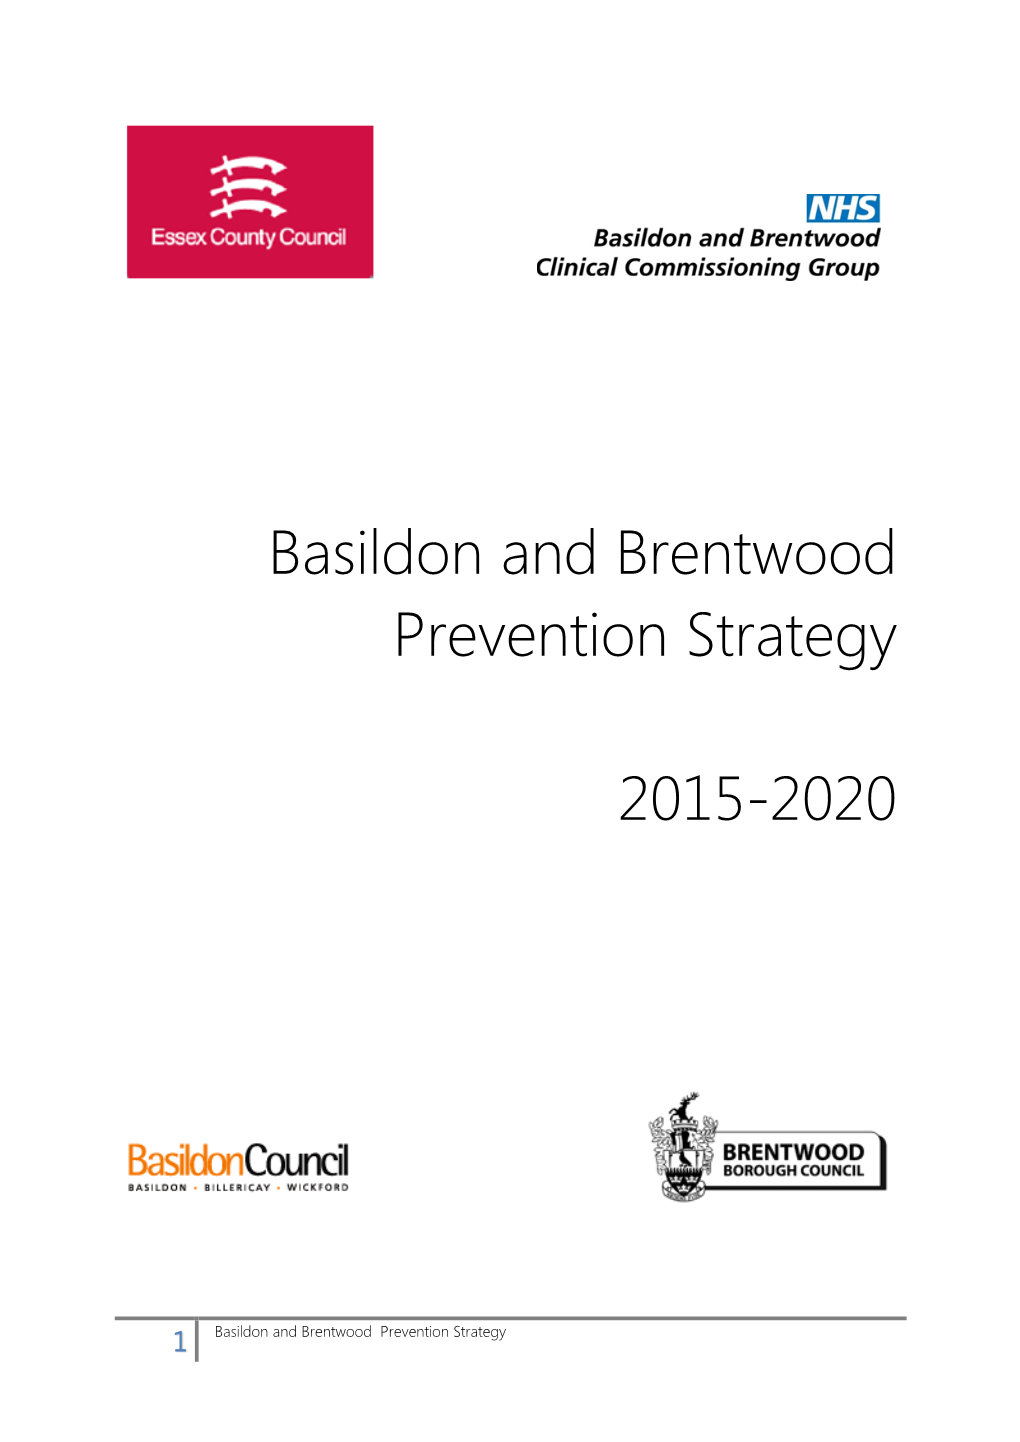 Basildon and Brentwood Prevention Strategy 2015-2020